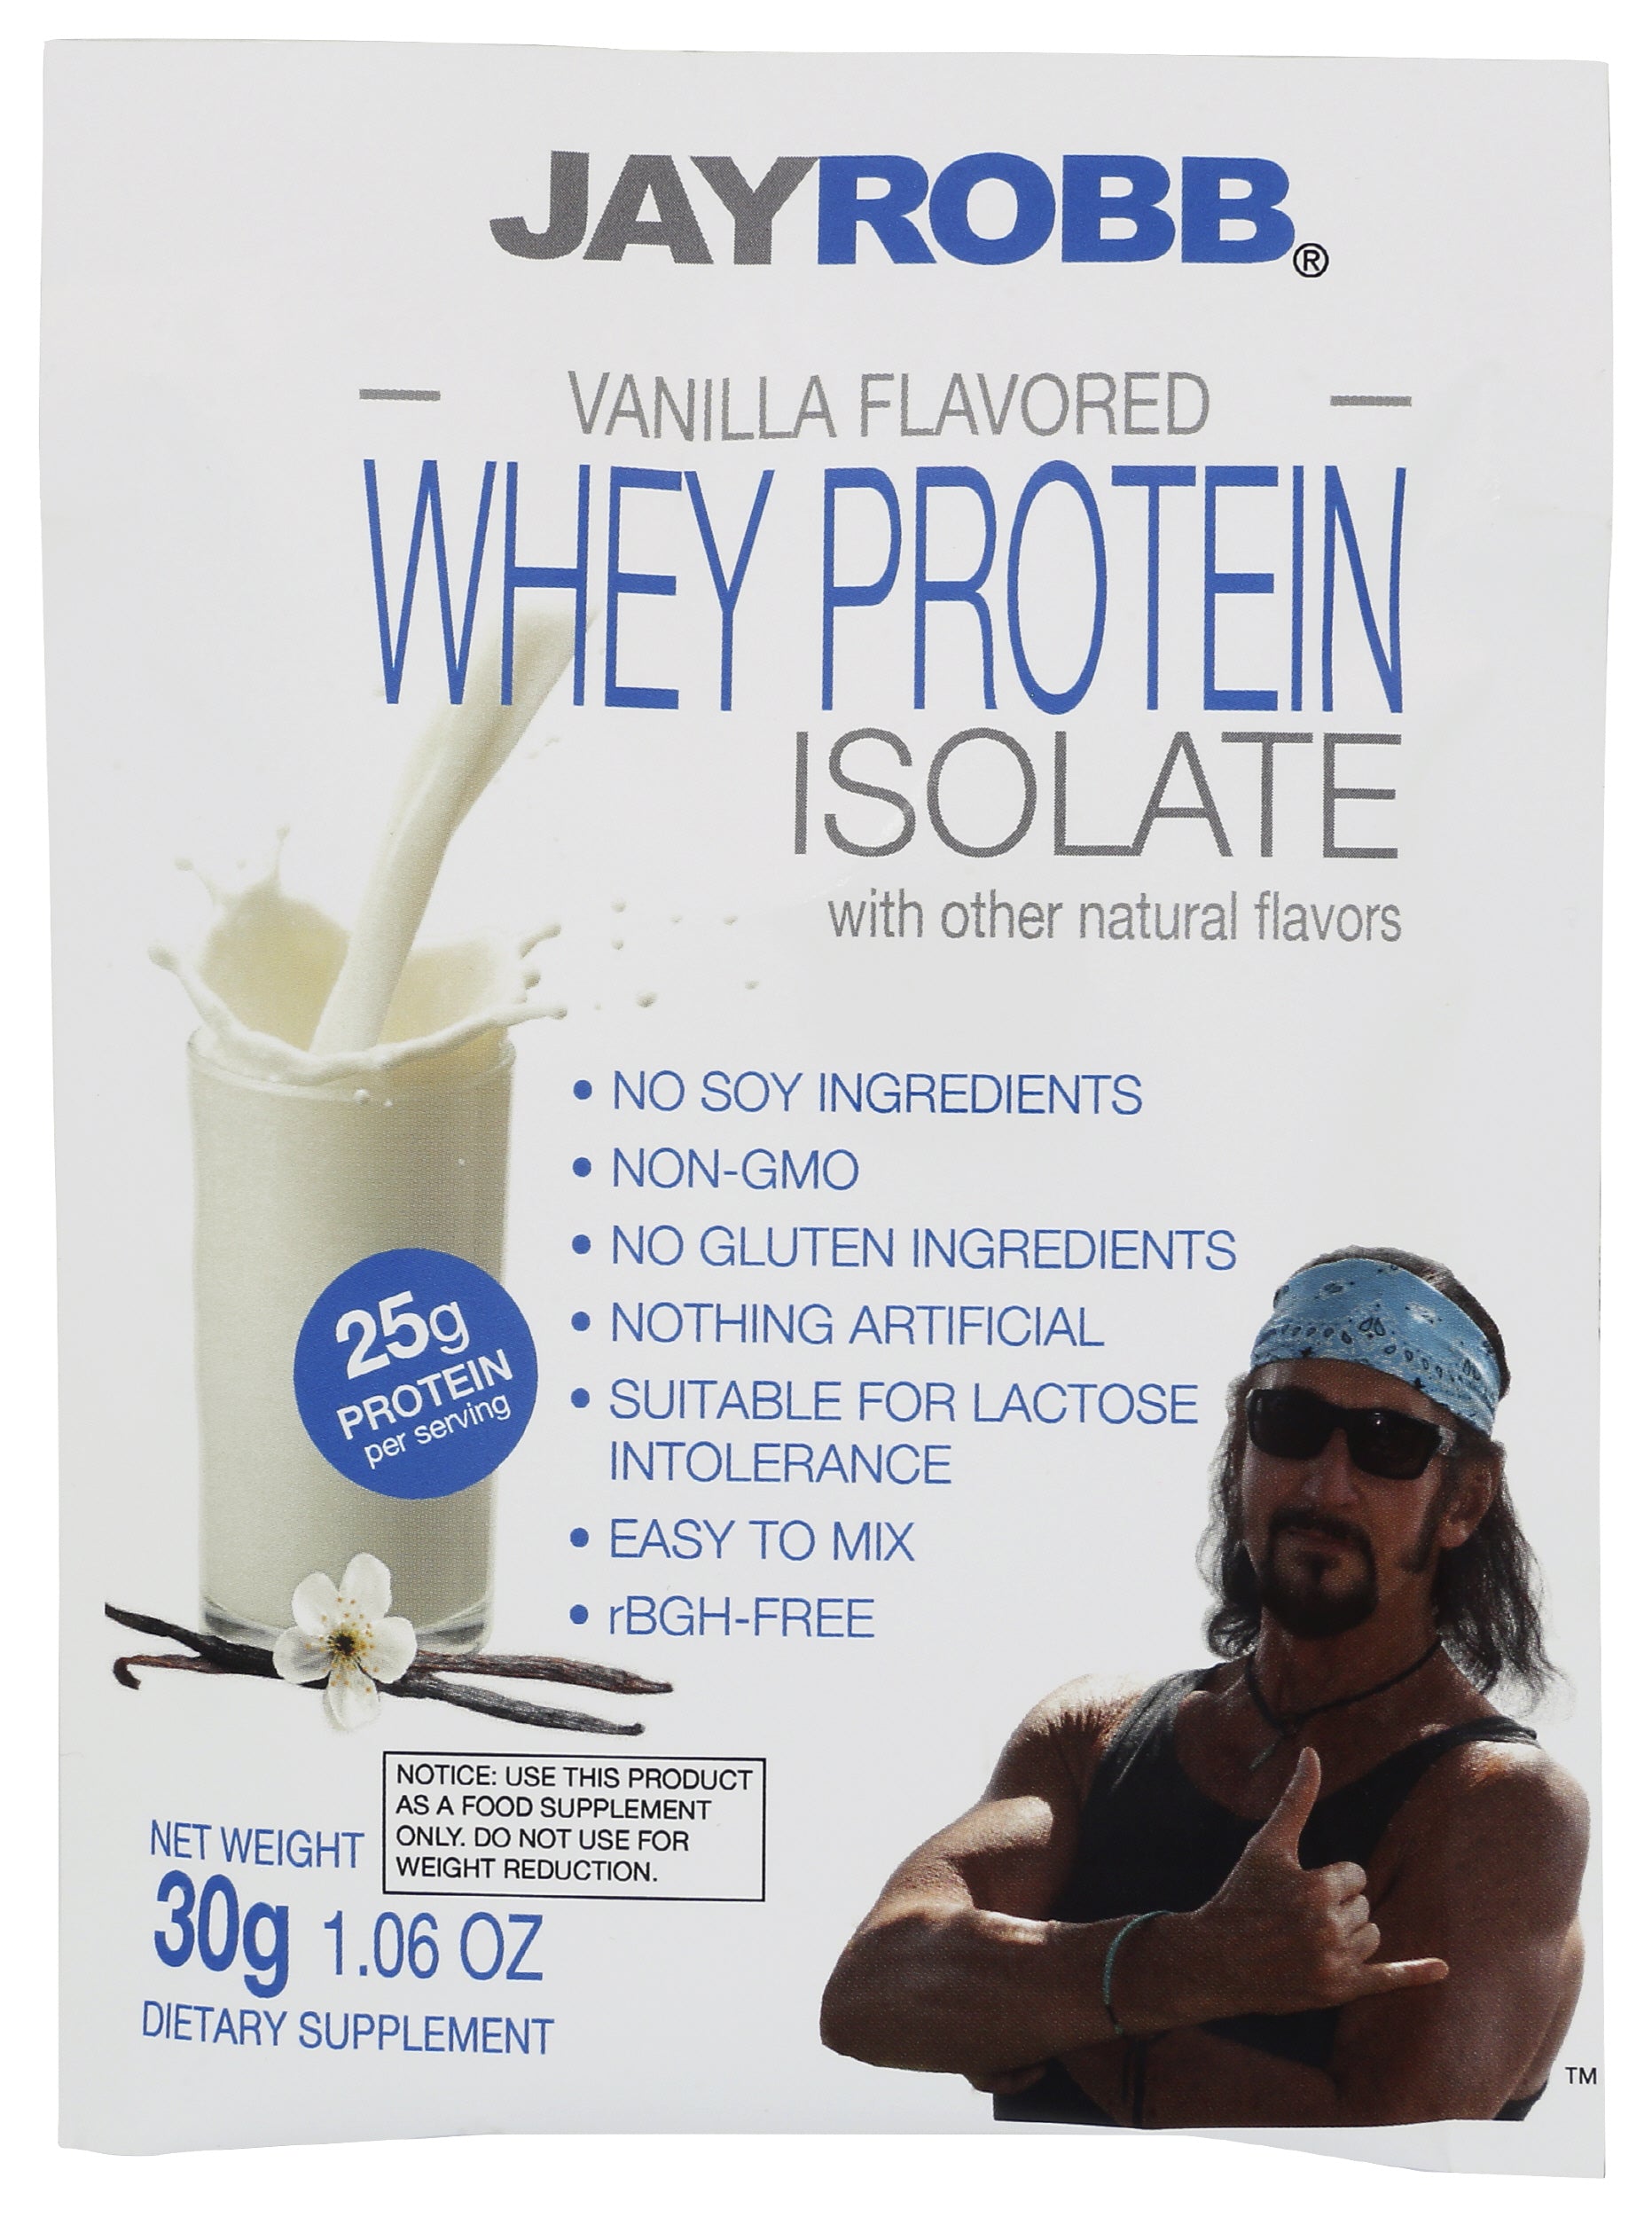 Jay Robb Vanilla Flavored Whey Protein Isolate 30g Front of Packet